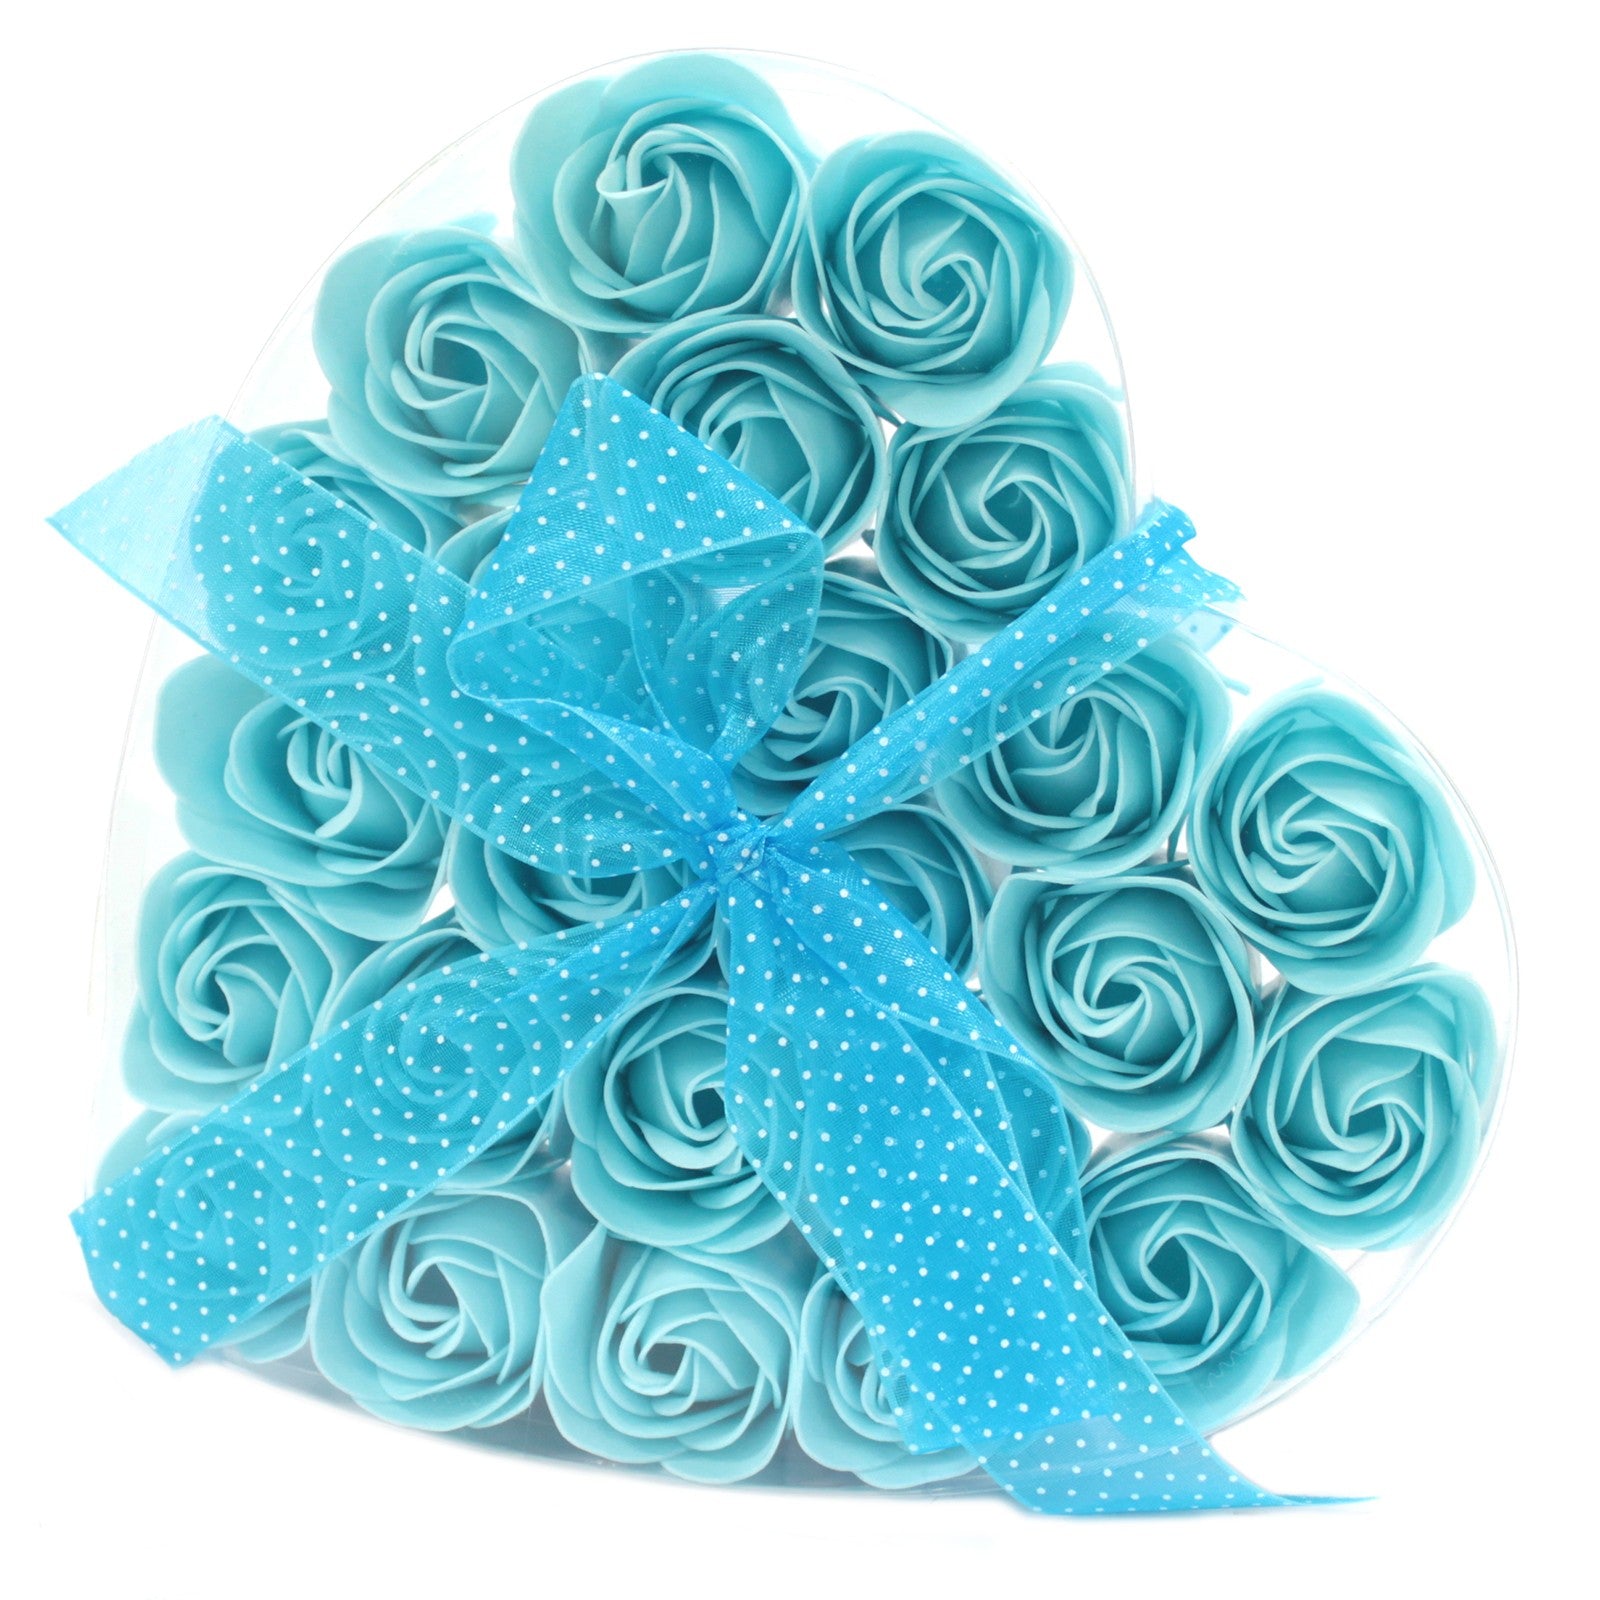 View Set of 24 Soap Flower Heart Box Blue Roses information